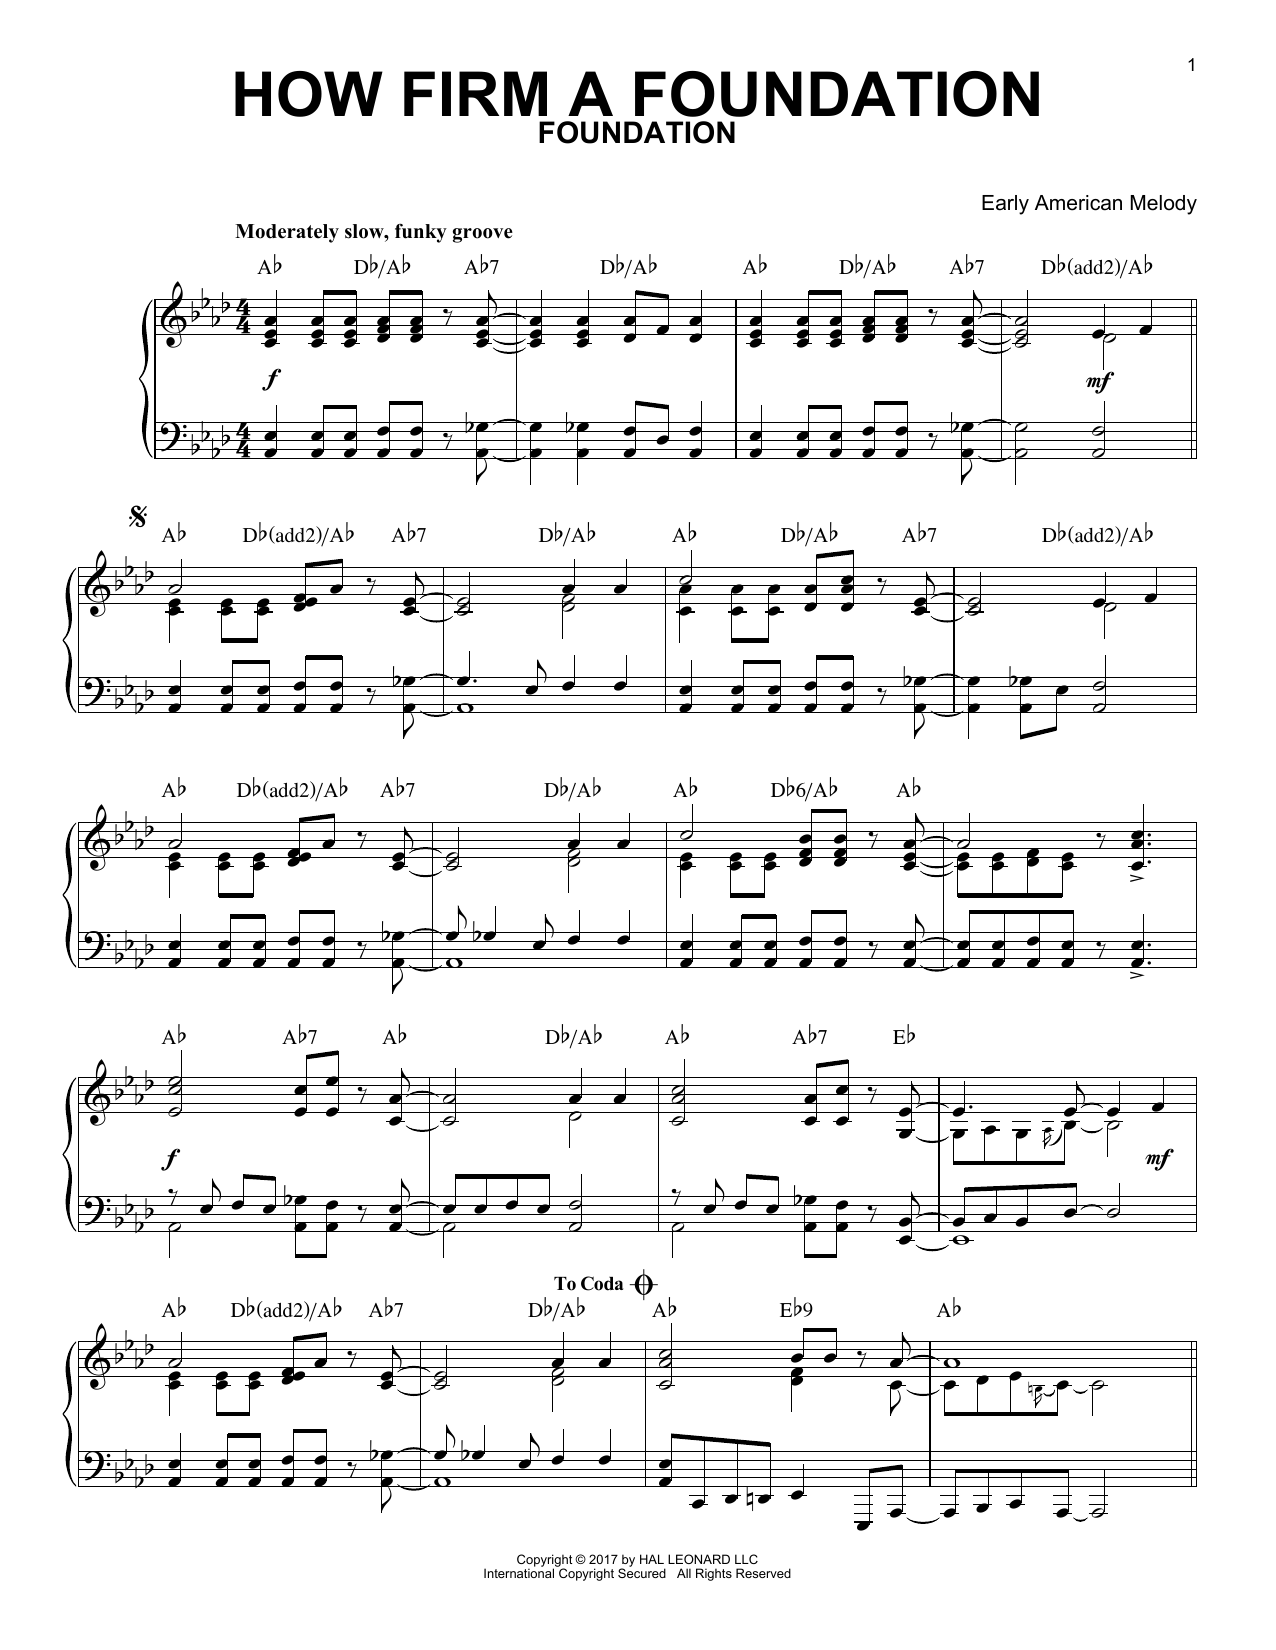 Download Early American Melody How Firm a Foundation [Jazz version] Sheet Music